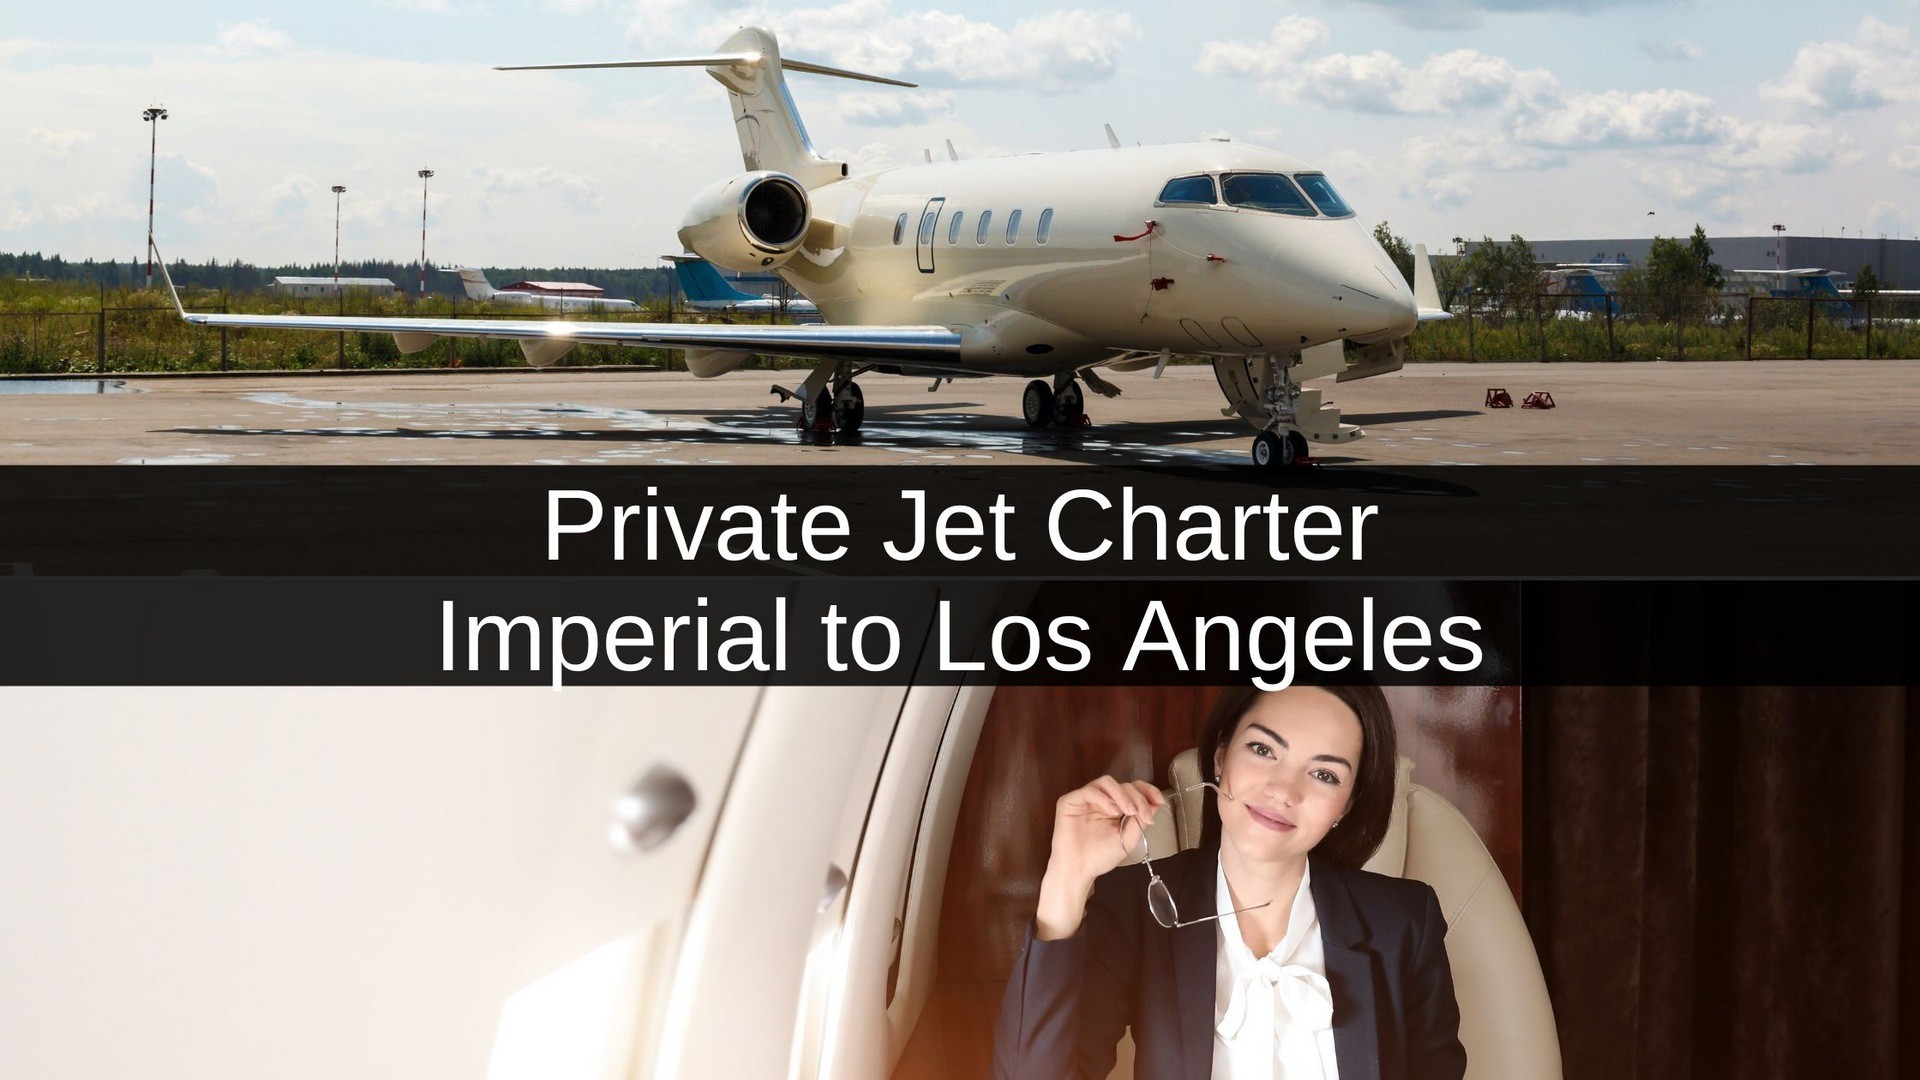 Private Jet Charter Imperial to Los Angeles